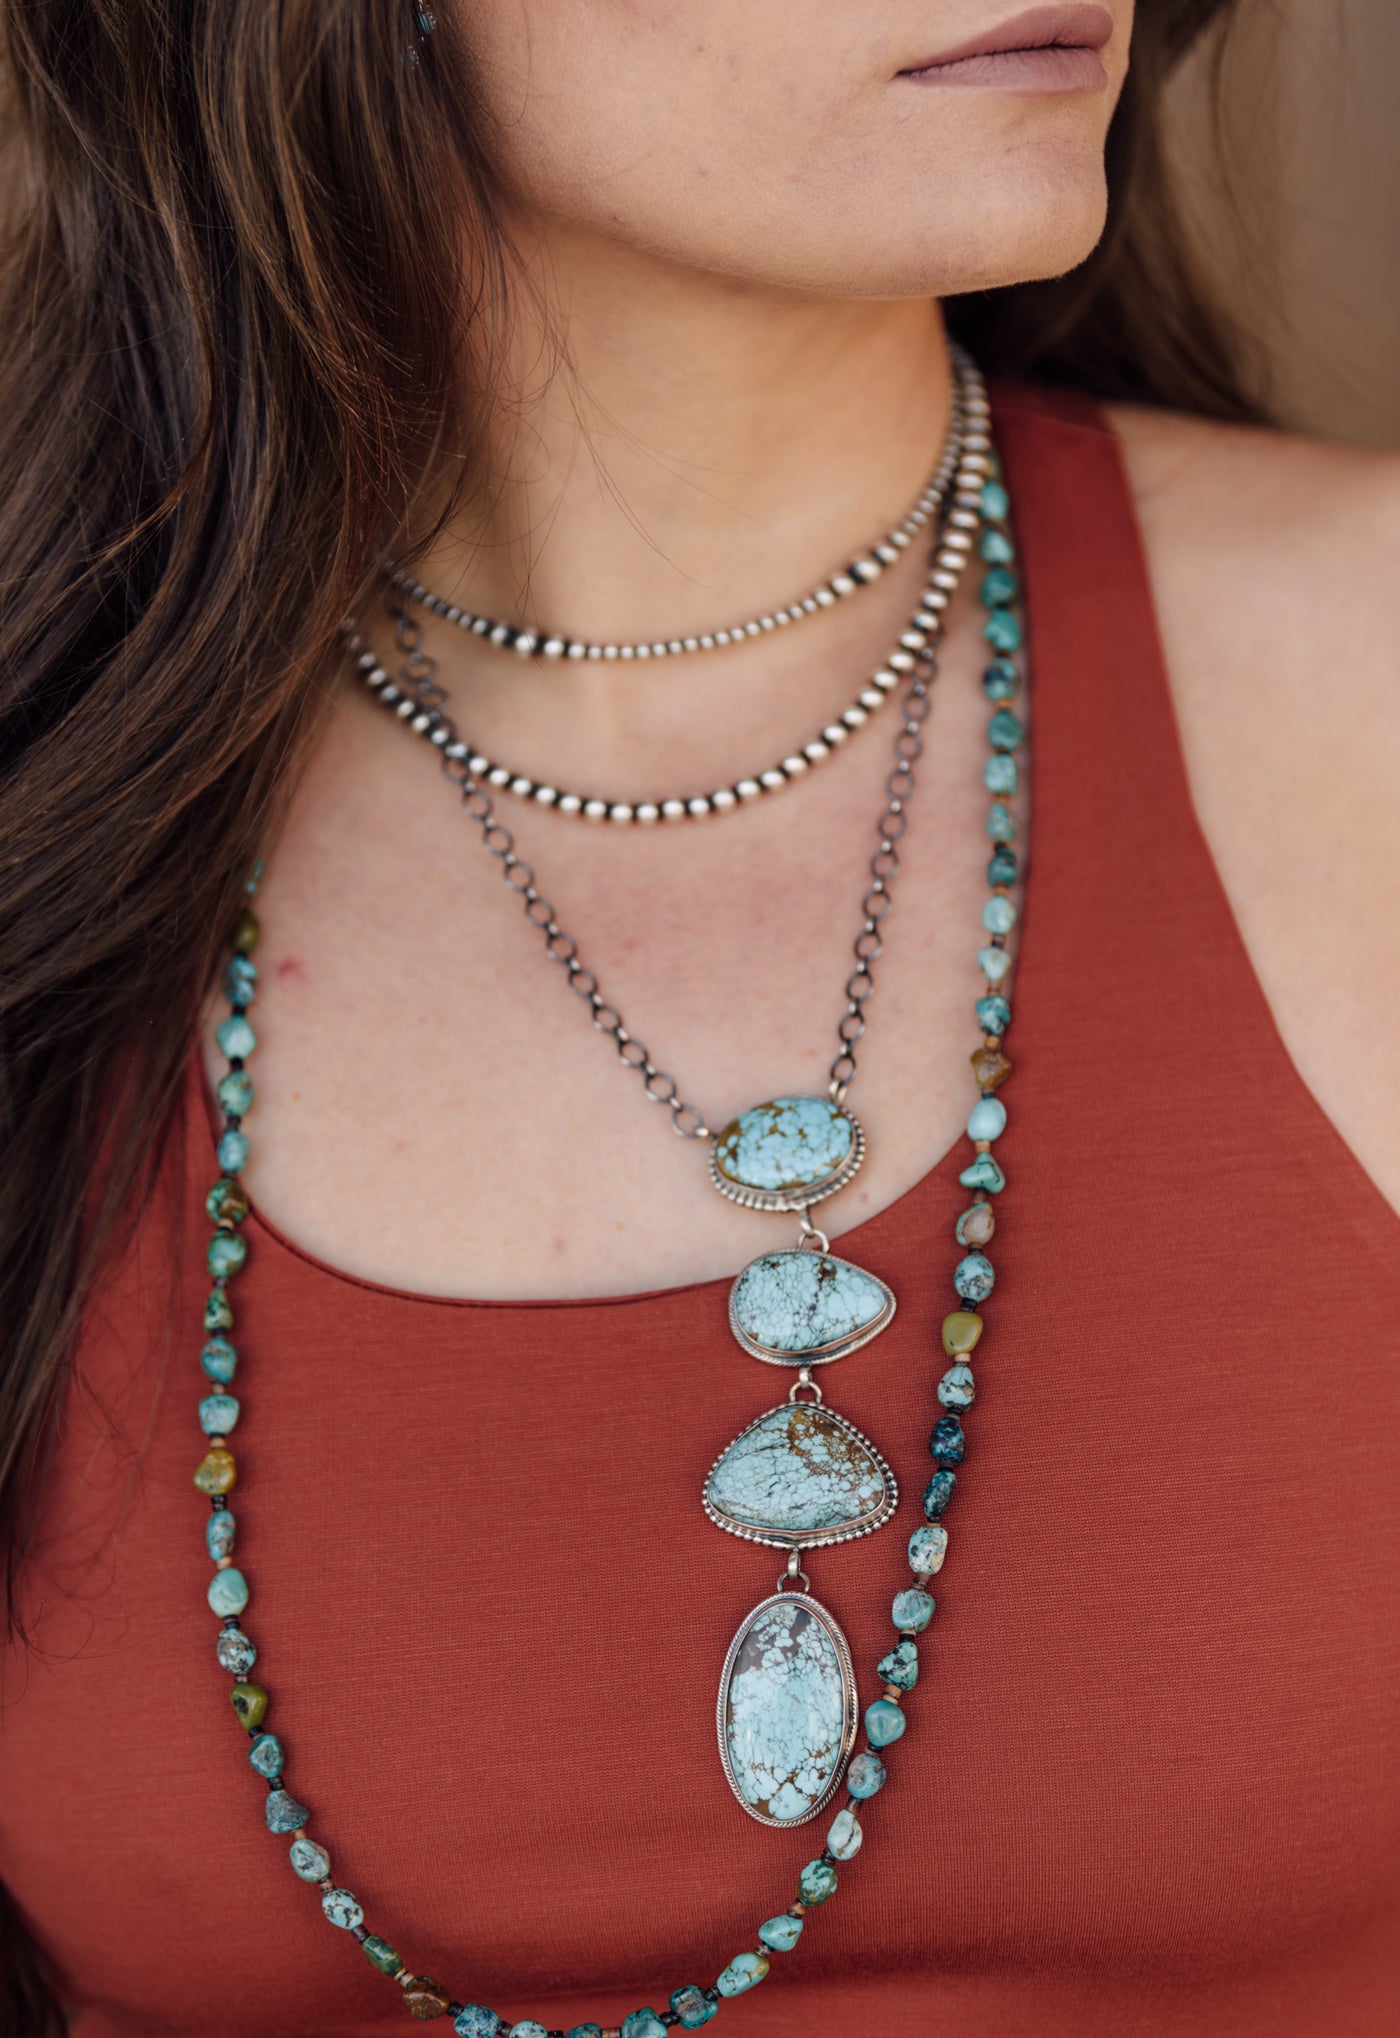 The Pandora Turquoise Necklace